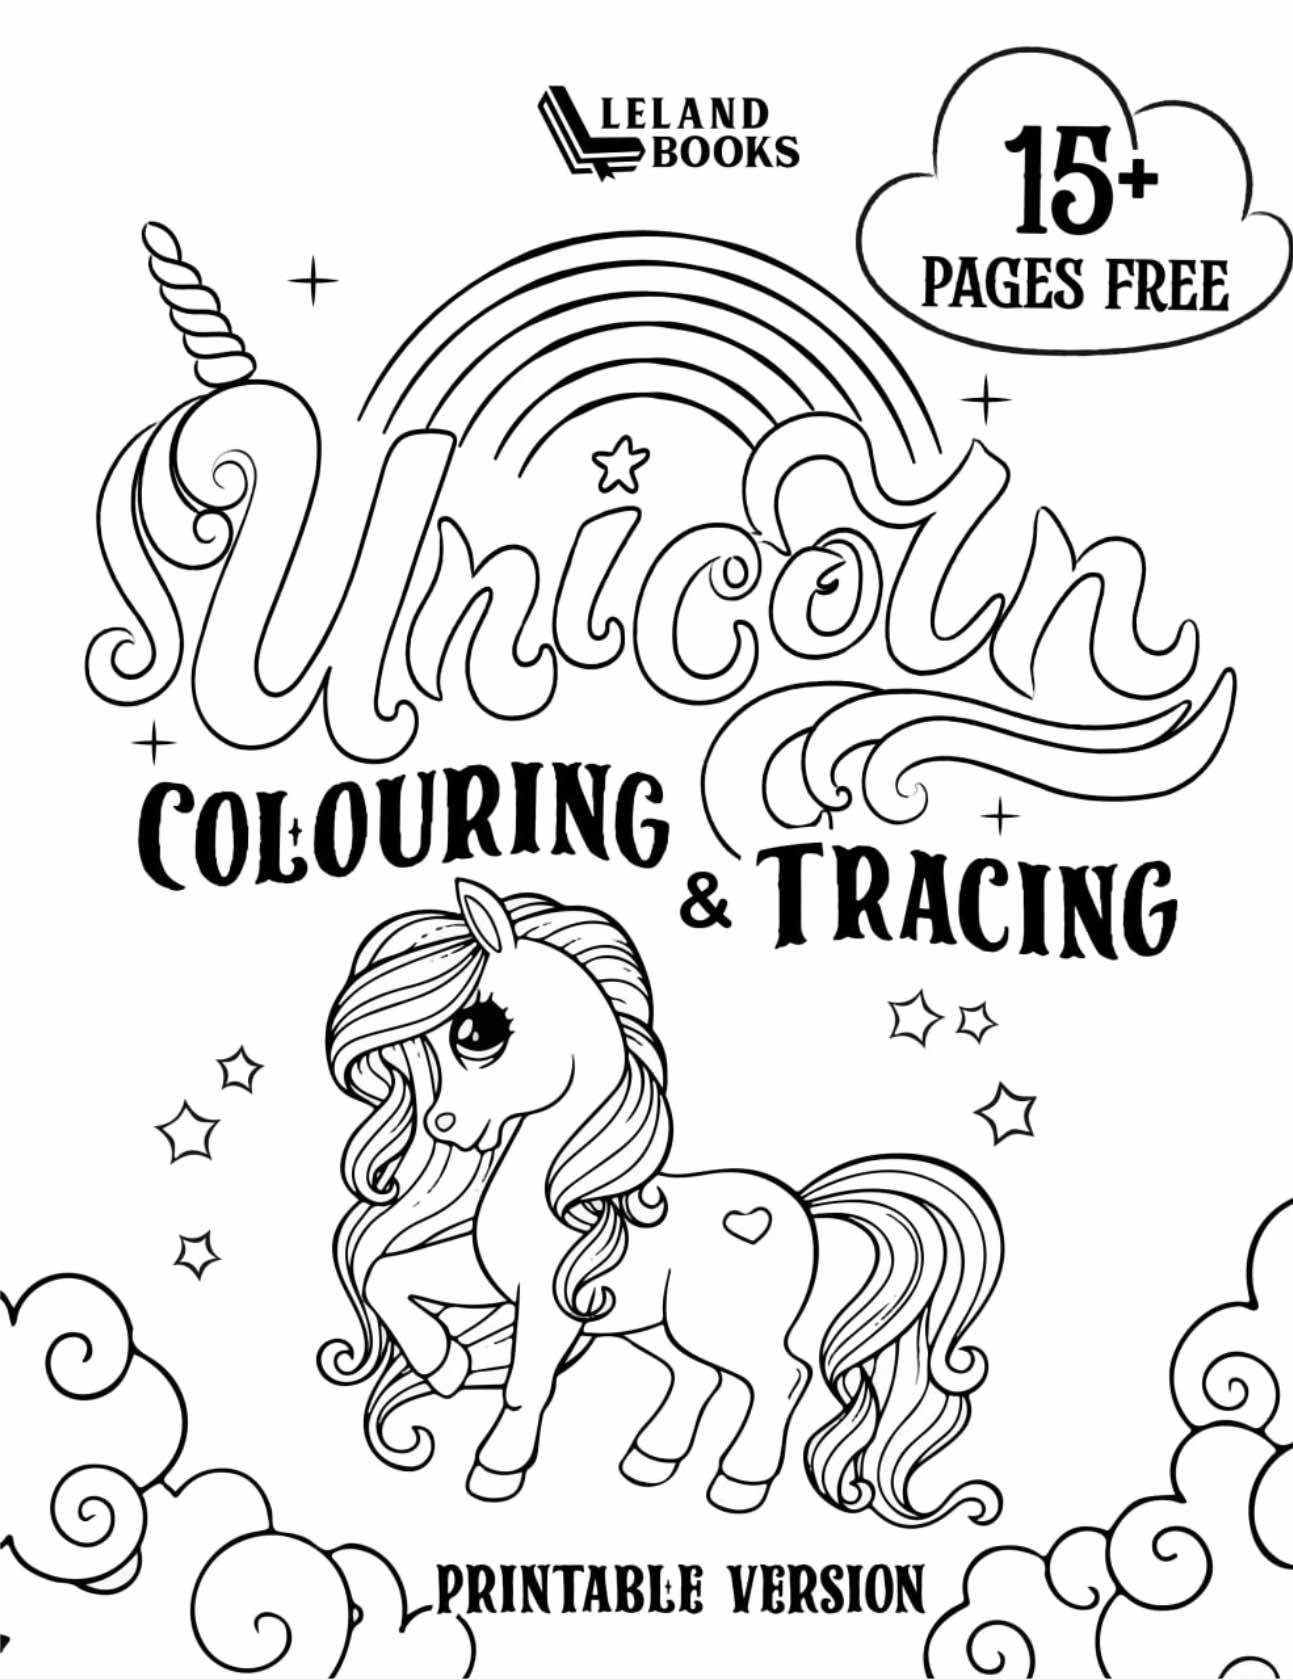 Unicorn Letter Tracing Book for Toddlers Graphic by DIGITAL